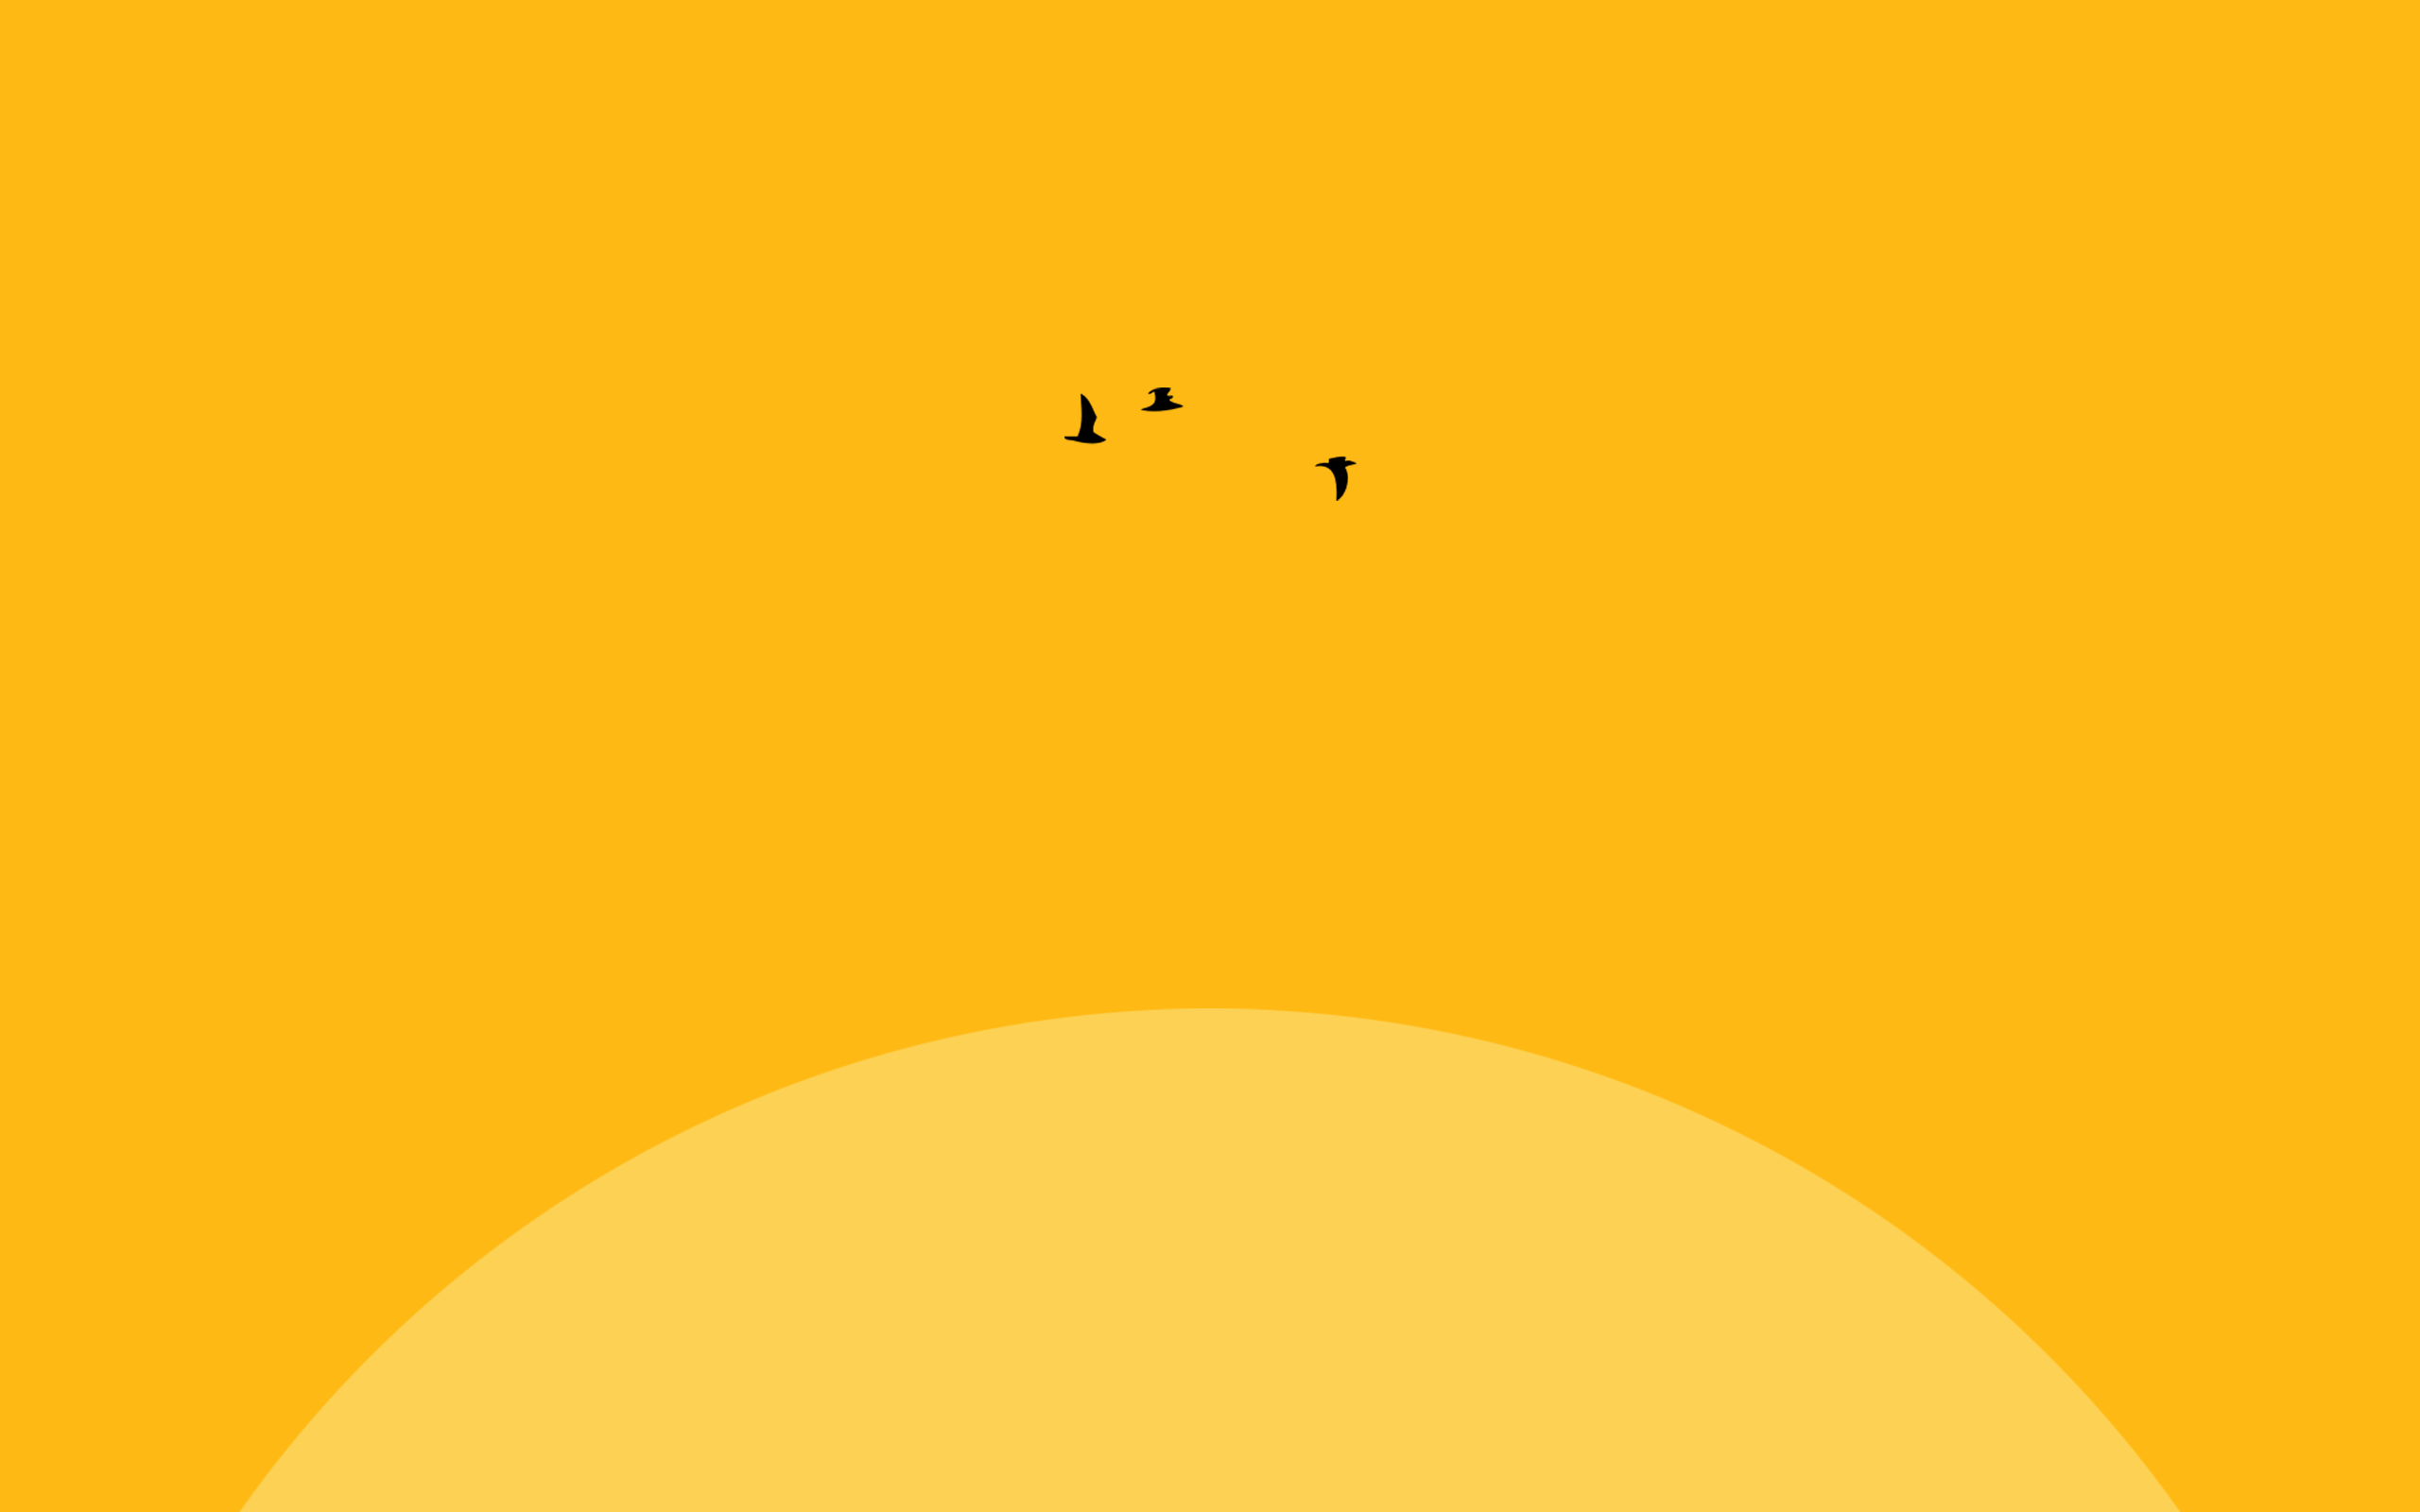 A yellow background with some birds flying in the sky - Sunshine